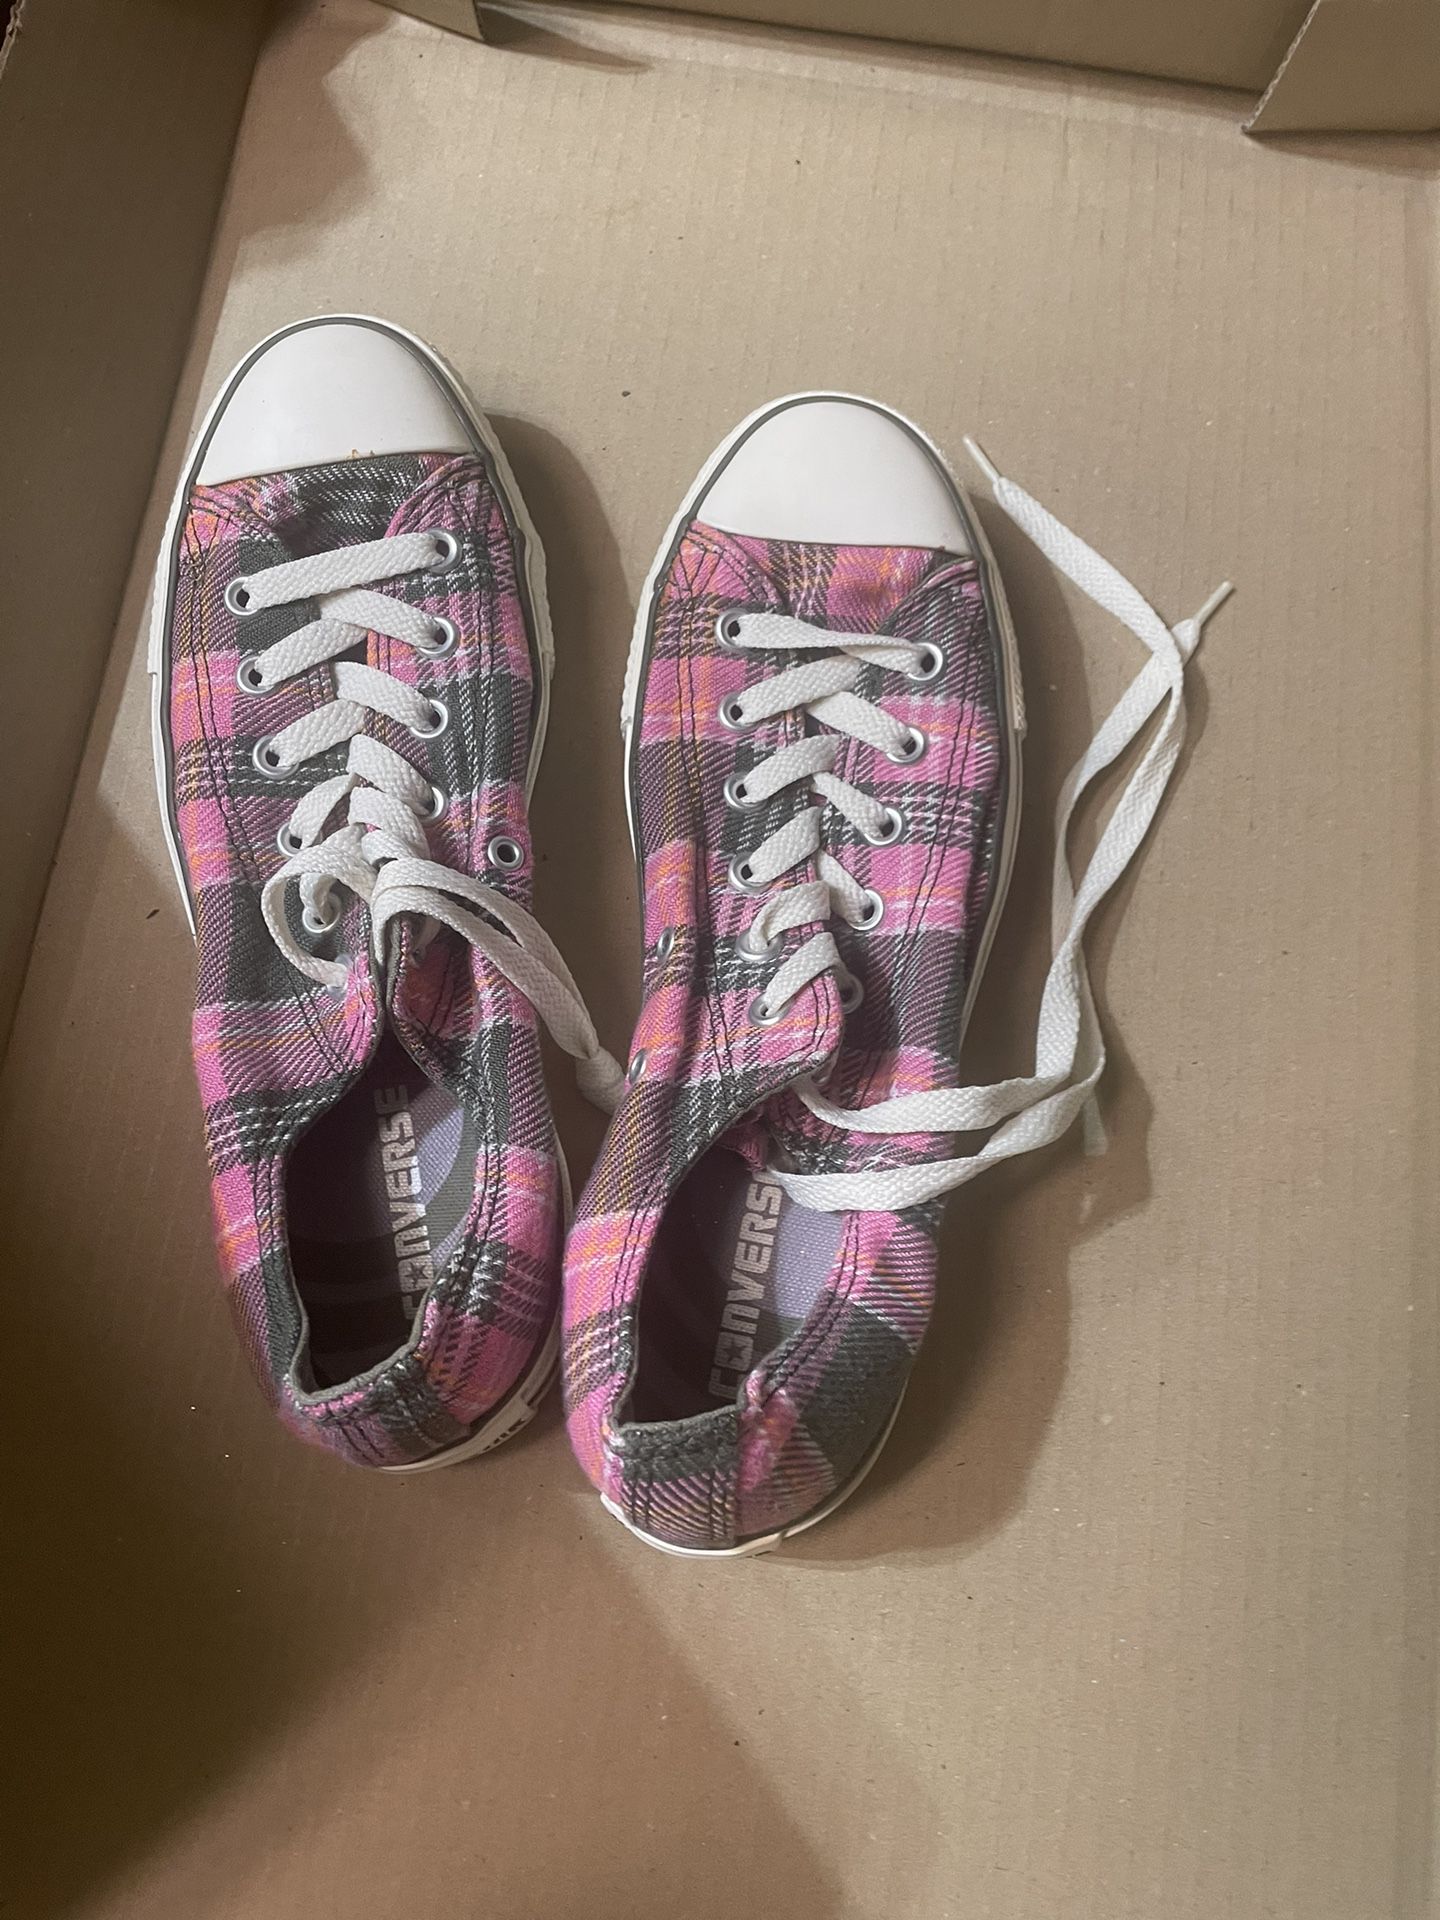 klint stole Vær forsigtig Size 7 Men's-Converse Chuck Taylor All Star Low Pink Plaid WO Size 9 for  Sale in Arlington, TX - OfferUp